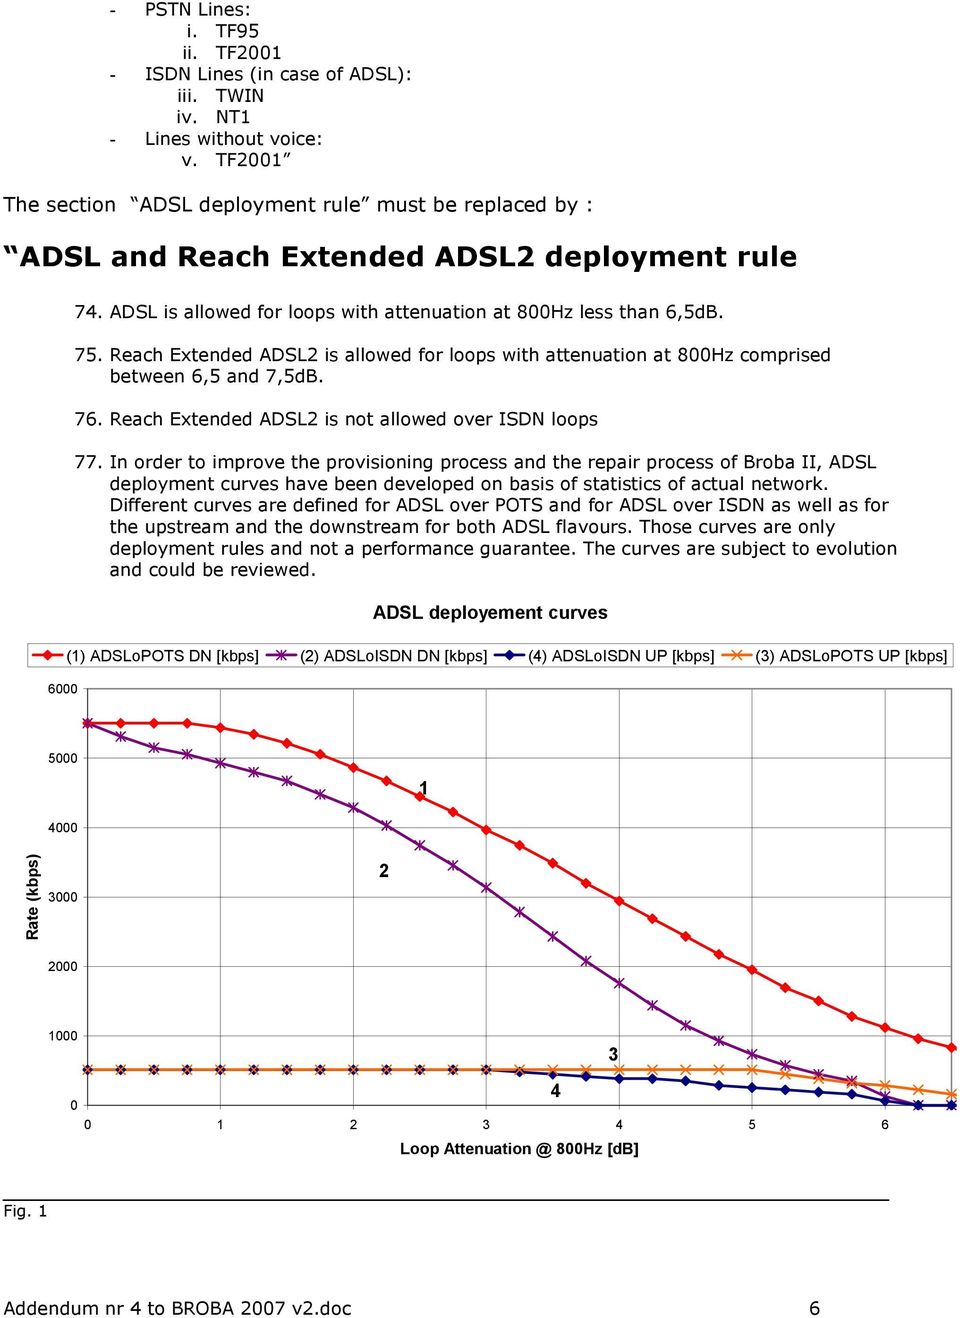 Reach Extended ADSL2 is allowed for loops with attenuation at 800Hz comprised between 6,5 and 7,5dB. 76. Reach Extended ADSL2 is not allowed over ISDN loops 77.